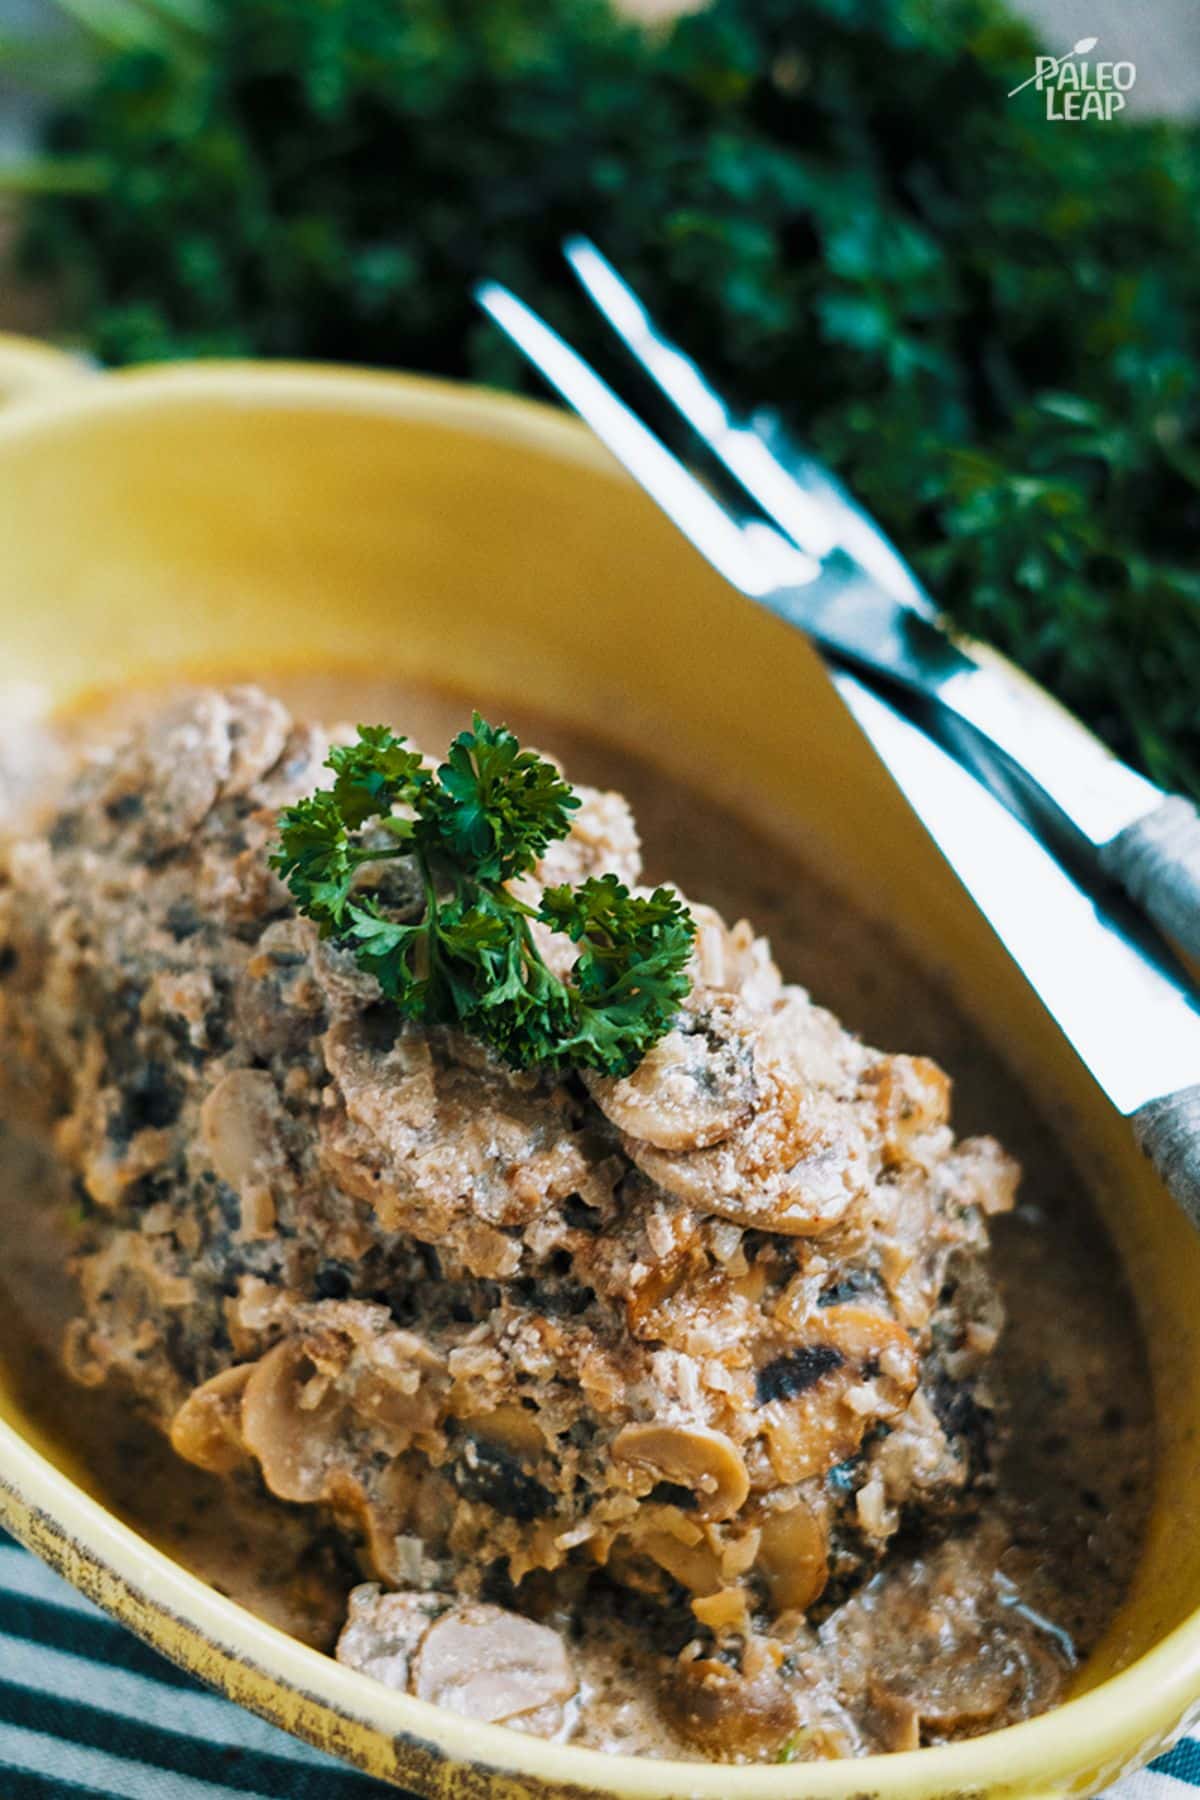 Slow Cooker Beef With Mushroom-Onion Sauce Recipe in a yellow bowl.